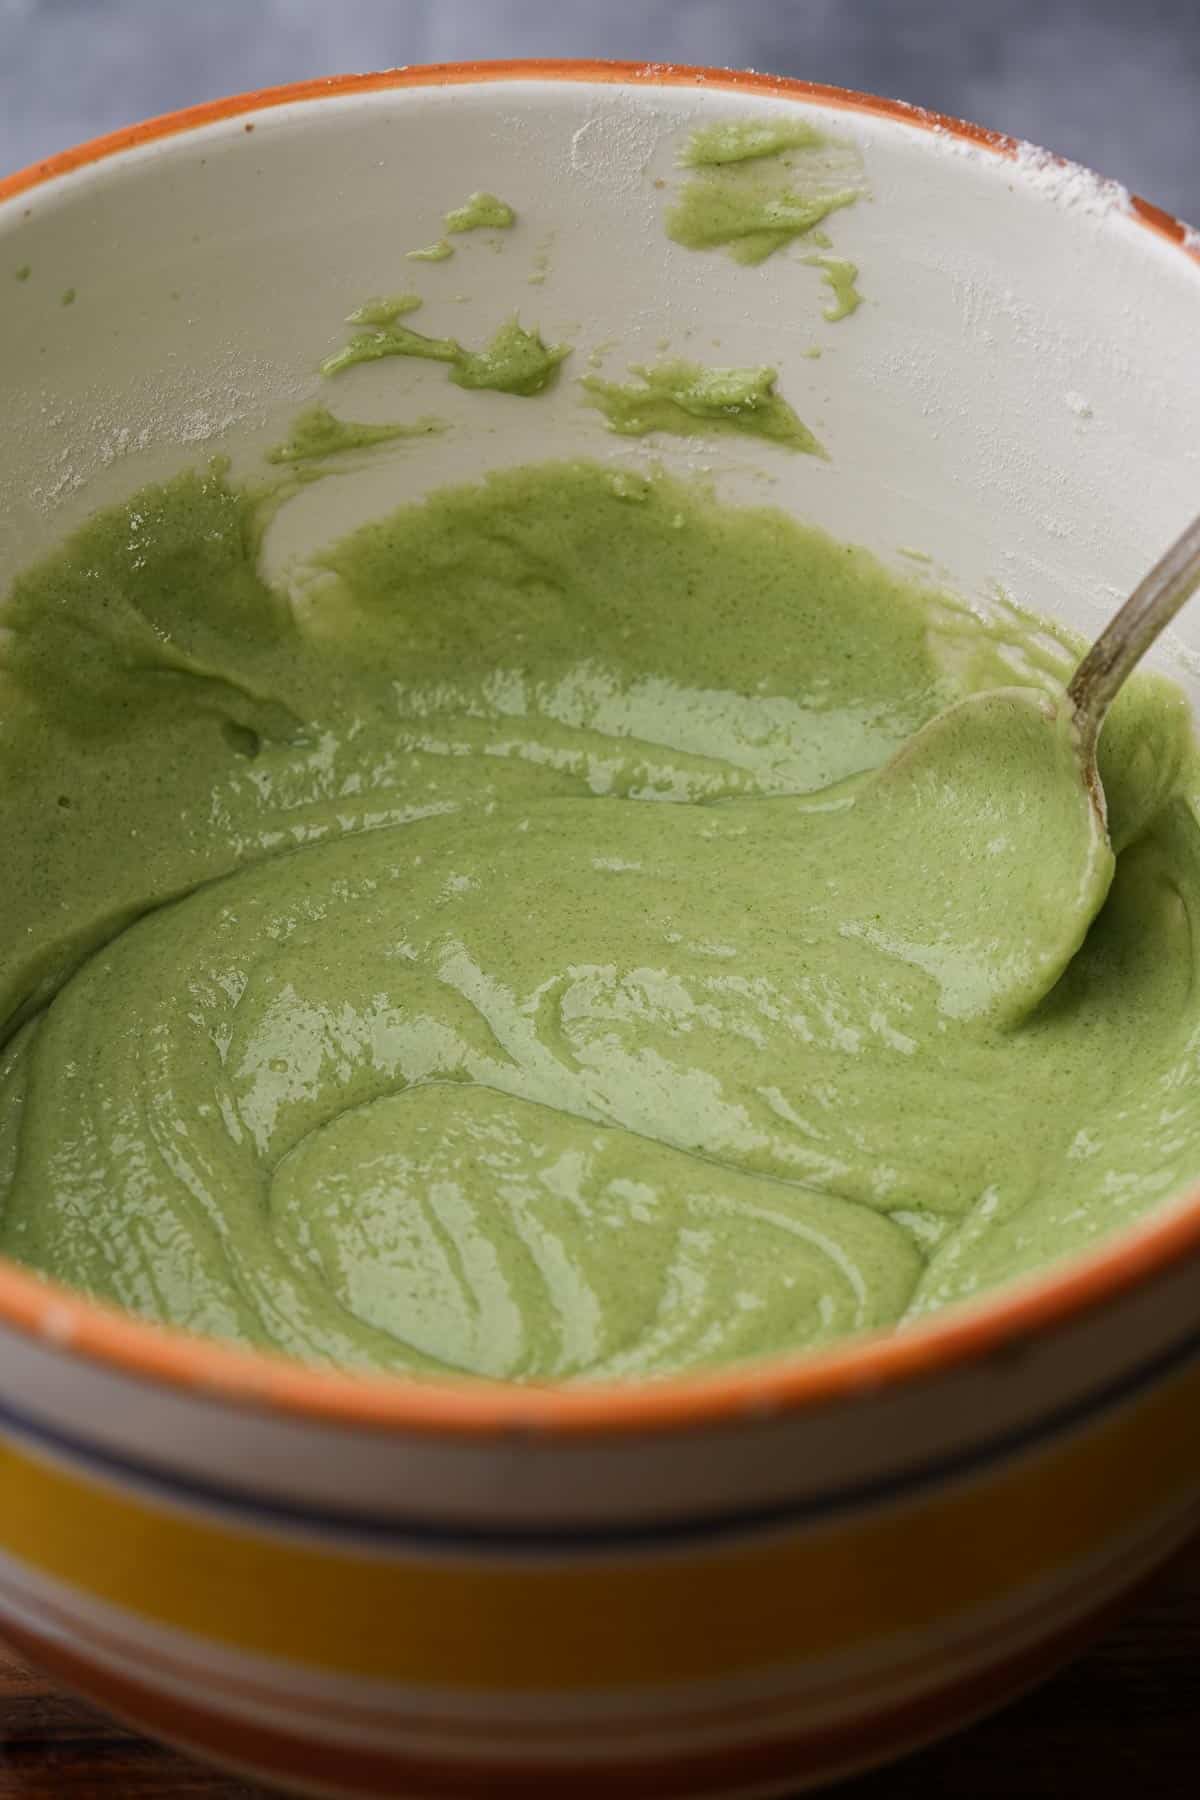 Pandan batter mixed up in a bowl with a spoon.